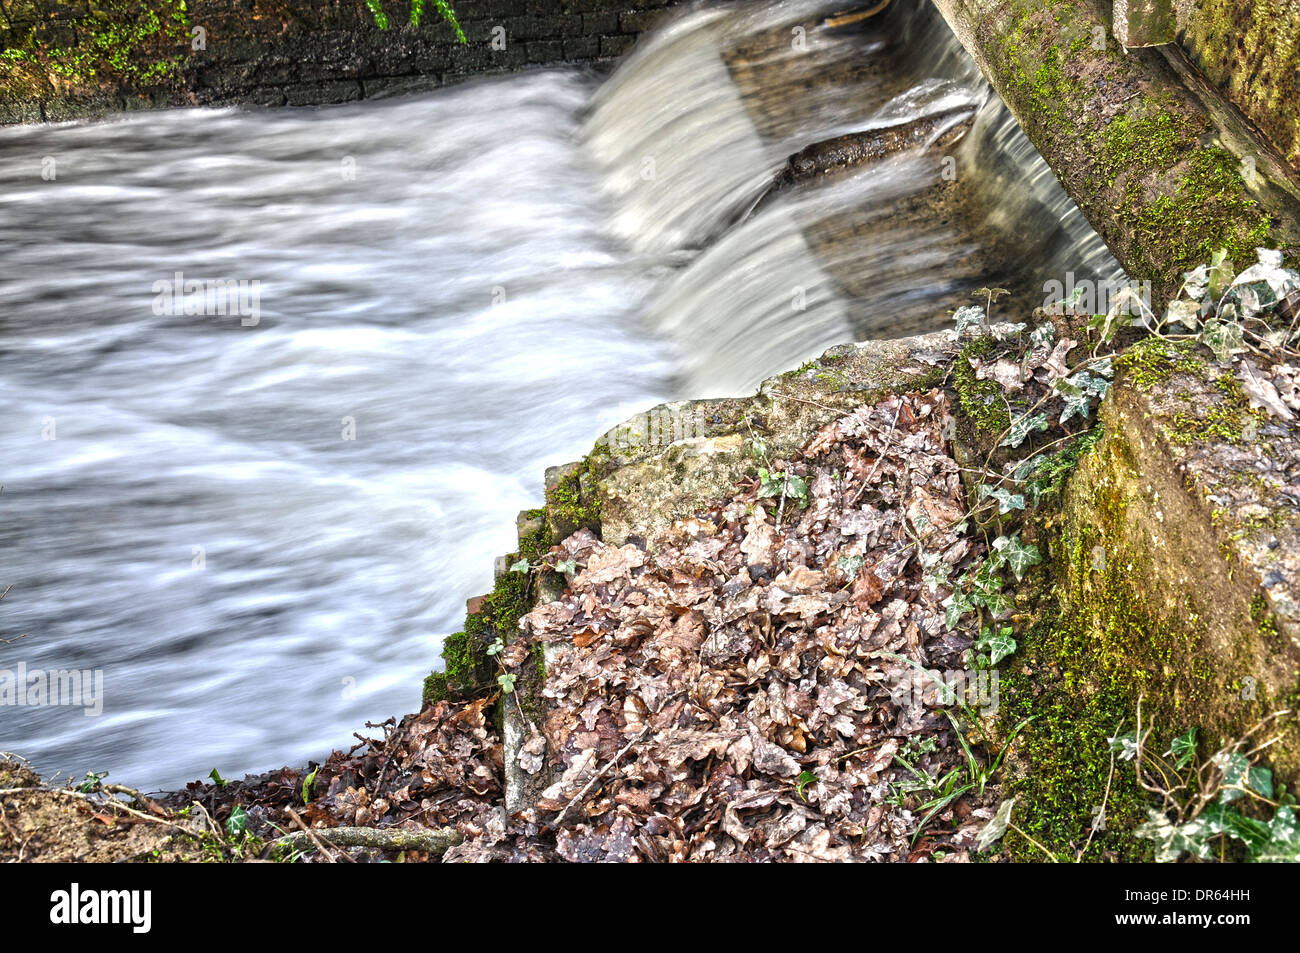 Small but fast flowing waterfall in the countryside near Brighton, England Stock Photo